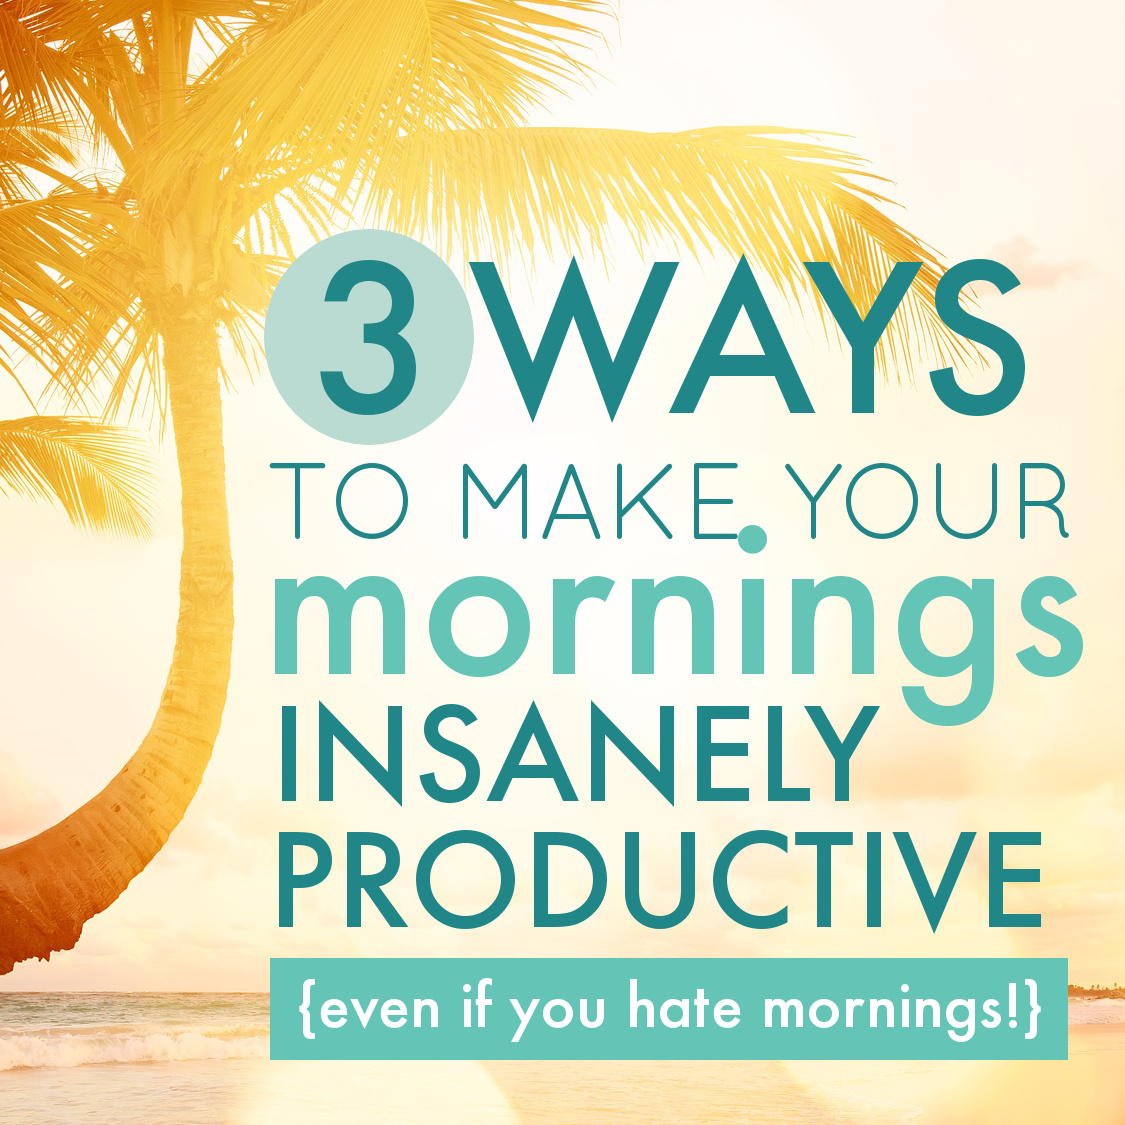 How to Make Your Mornings Insanely Productive (Even if You Hate Mornings)